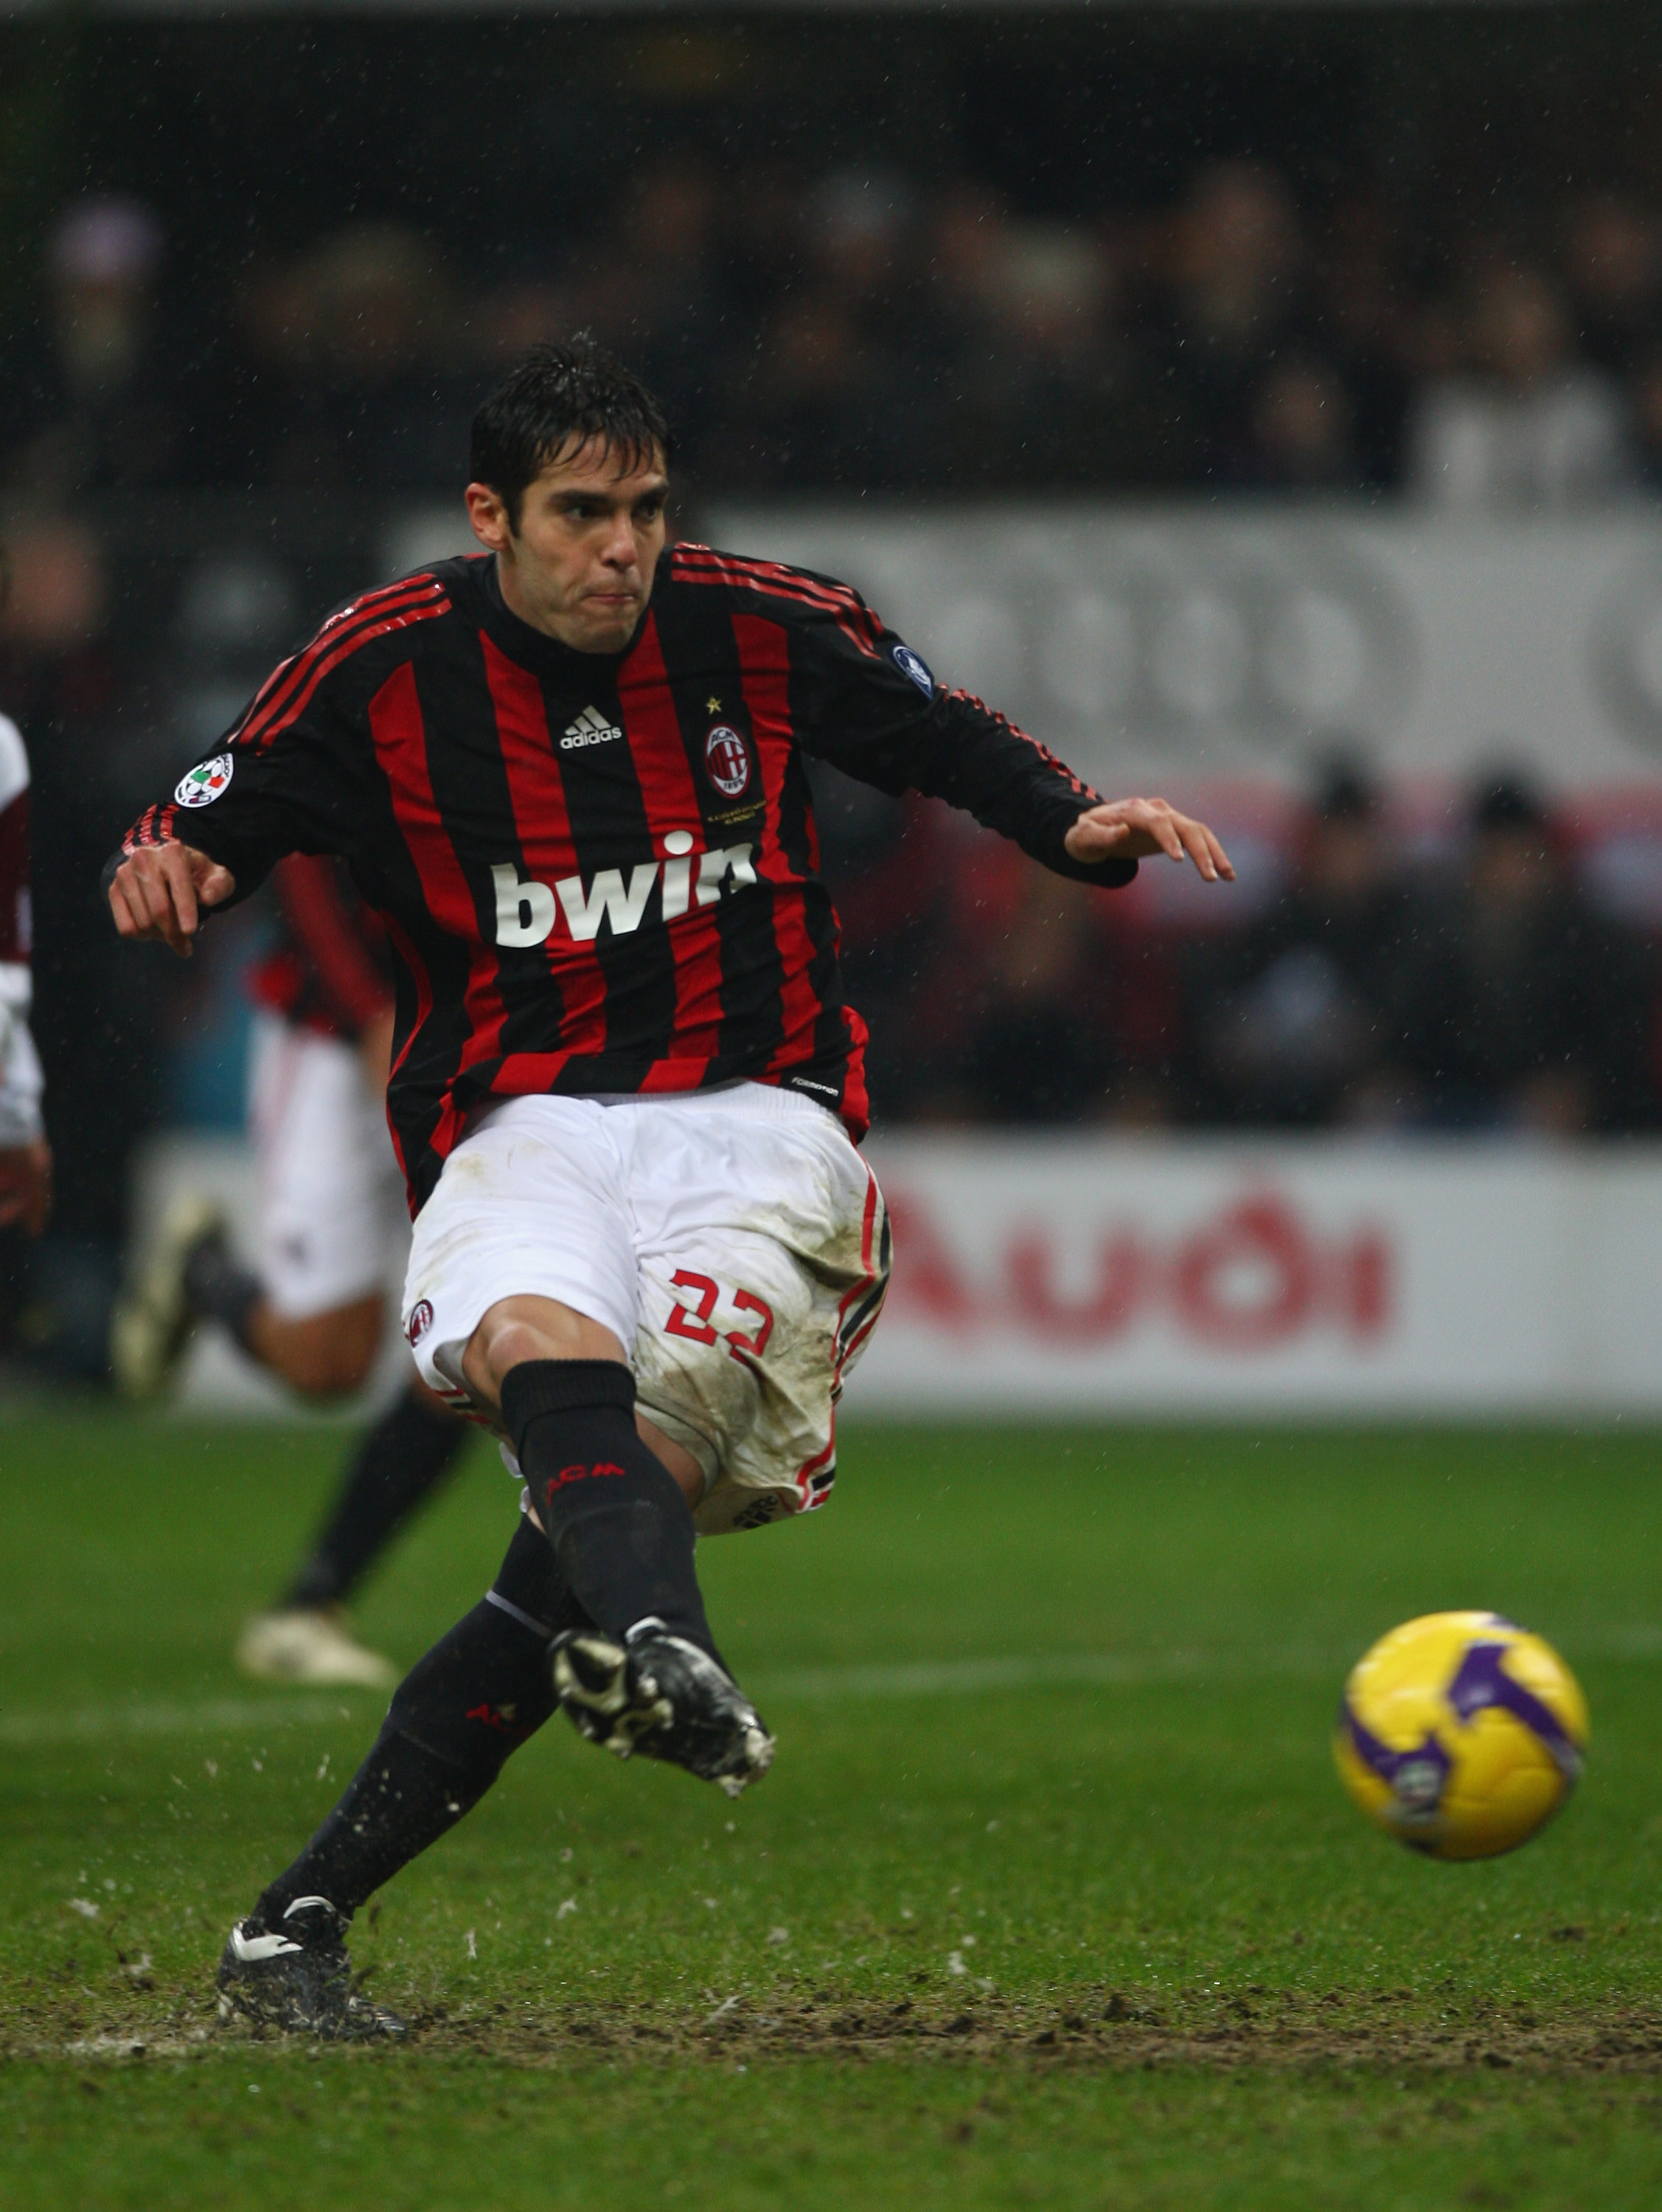 MILAN, ITALY - FEBRUARY 07:  Kaka of Milan during the Serie A match between AC Milan and Reggina at the San Siro stadium on February 7, 2009 in Milan,Italy.  (Photo by Michael Steele/Getty Images)